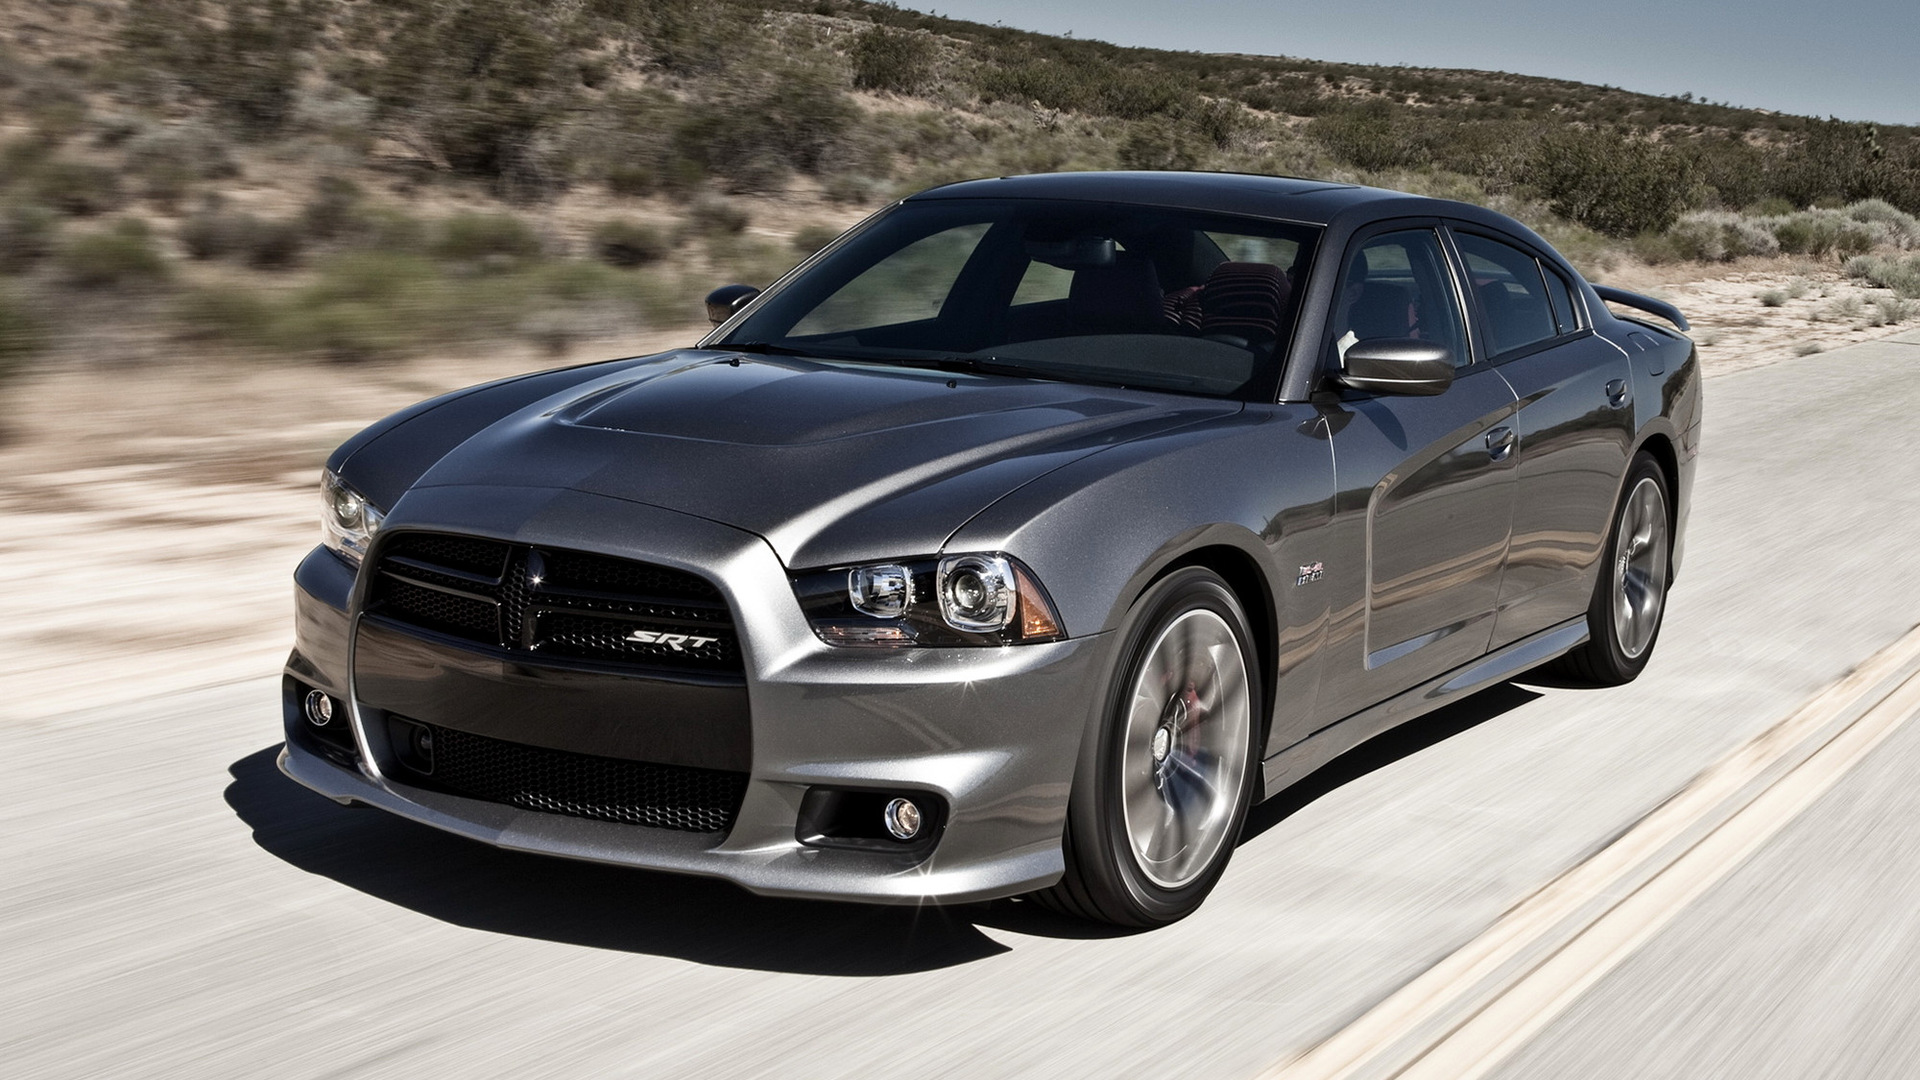 Dodge Charger Srt8 Wallpapers